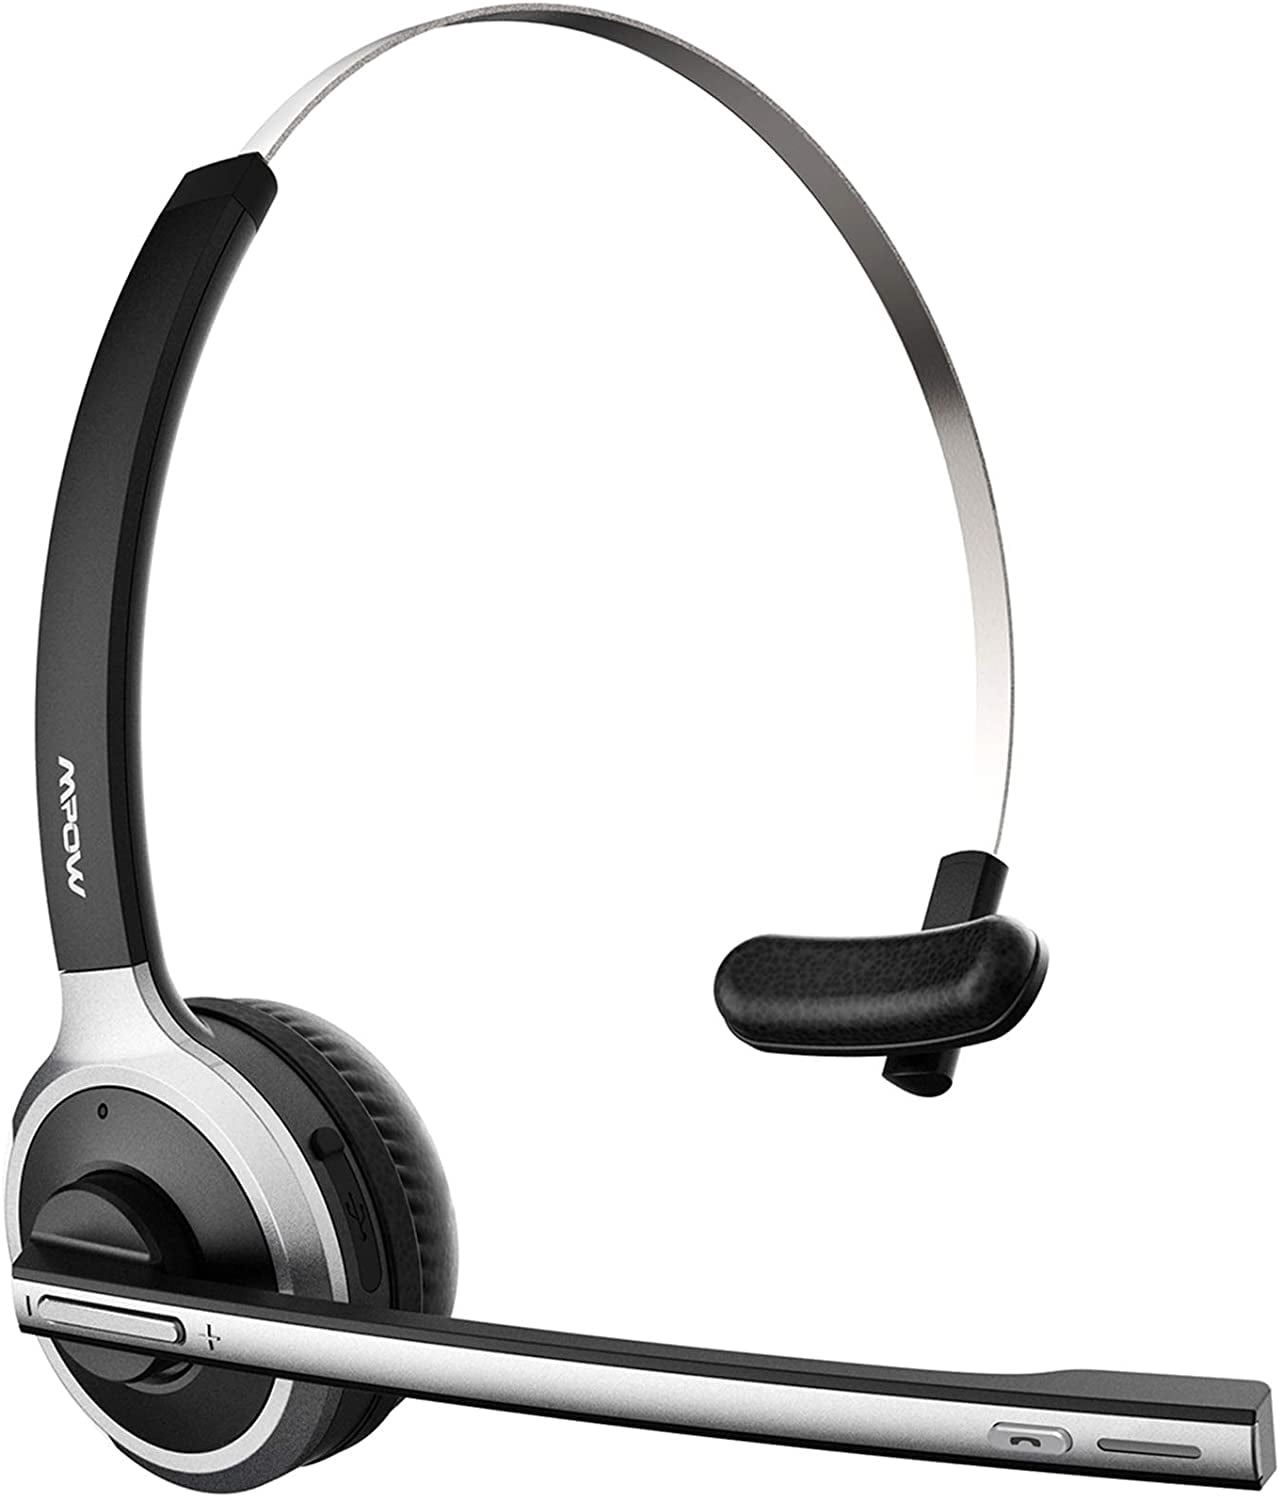 forræder Bliv overrasket sammentrækning Mpow M5 Trucker Bluetooth Headset with Flip-to-Mute Microphone, Bluetooth  5.0, Noise Cancelling Mic, 18 Hours Talk Time, On Ear Wireless Headphones  for Home, Office, Call Center, Driving - Walmart.com